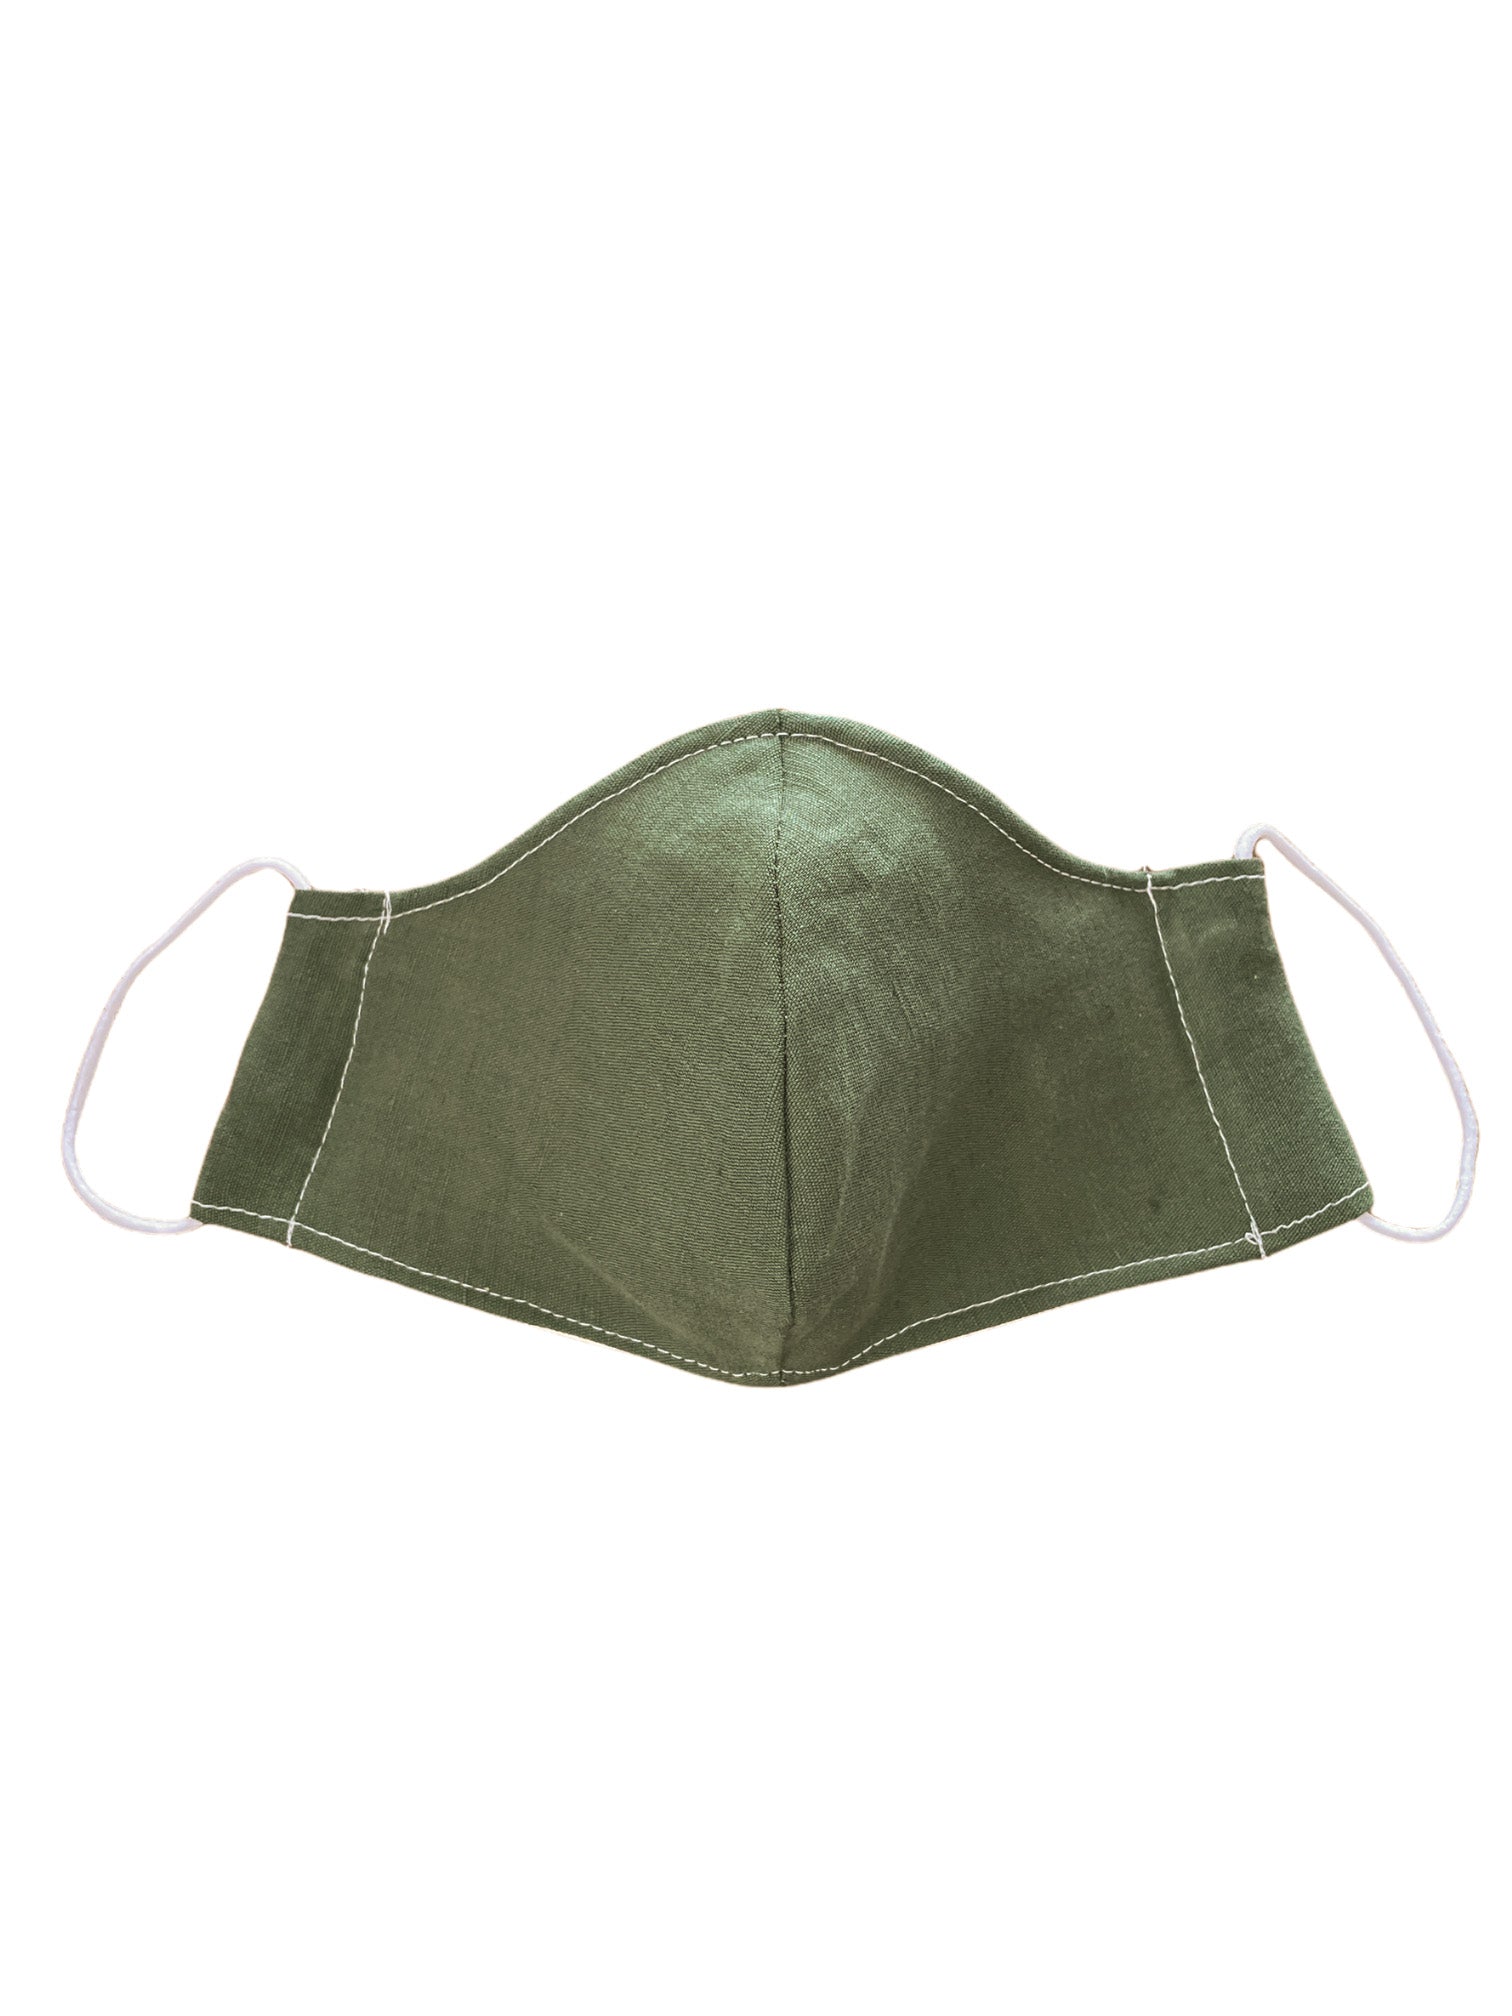 Olive Green Linen/Cotton Face Mask